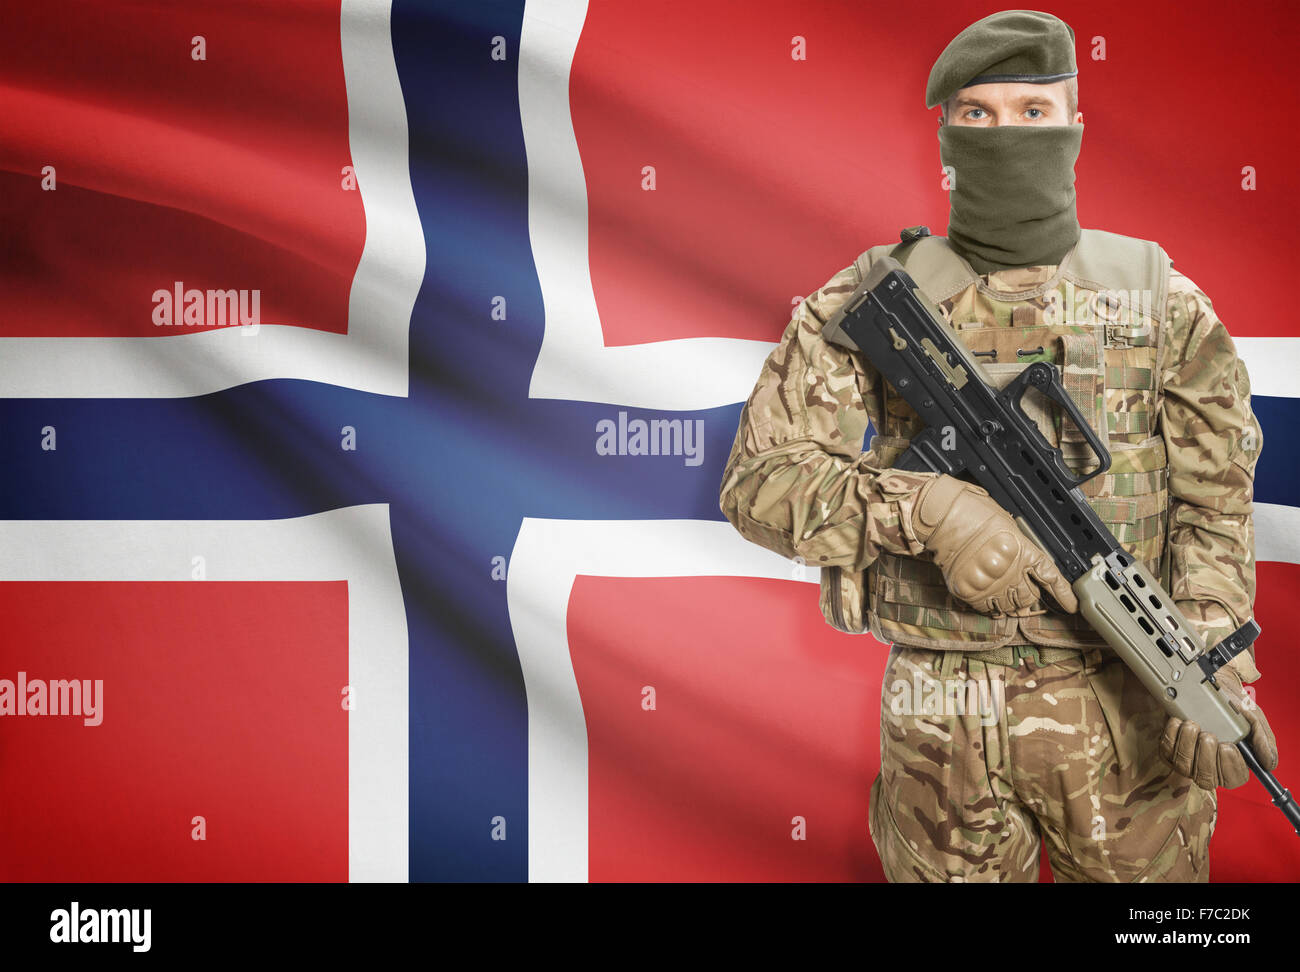 Soldier holding machine gun with national flag on background - Norway Stock Photo